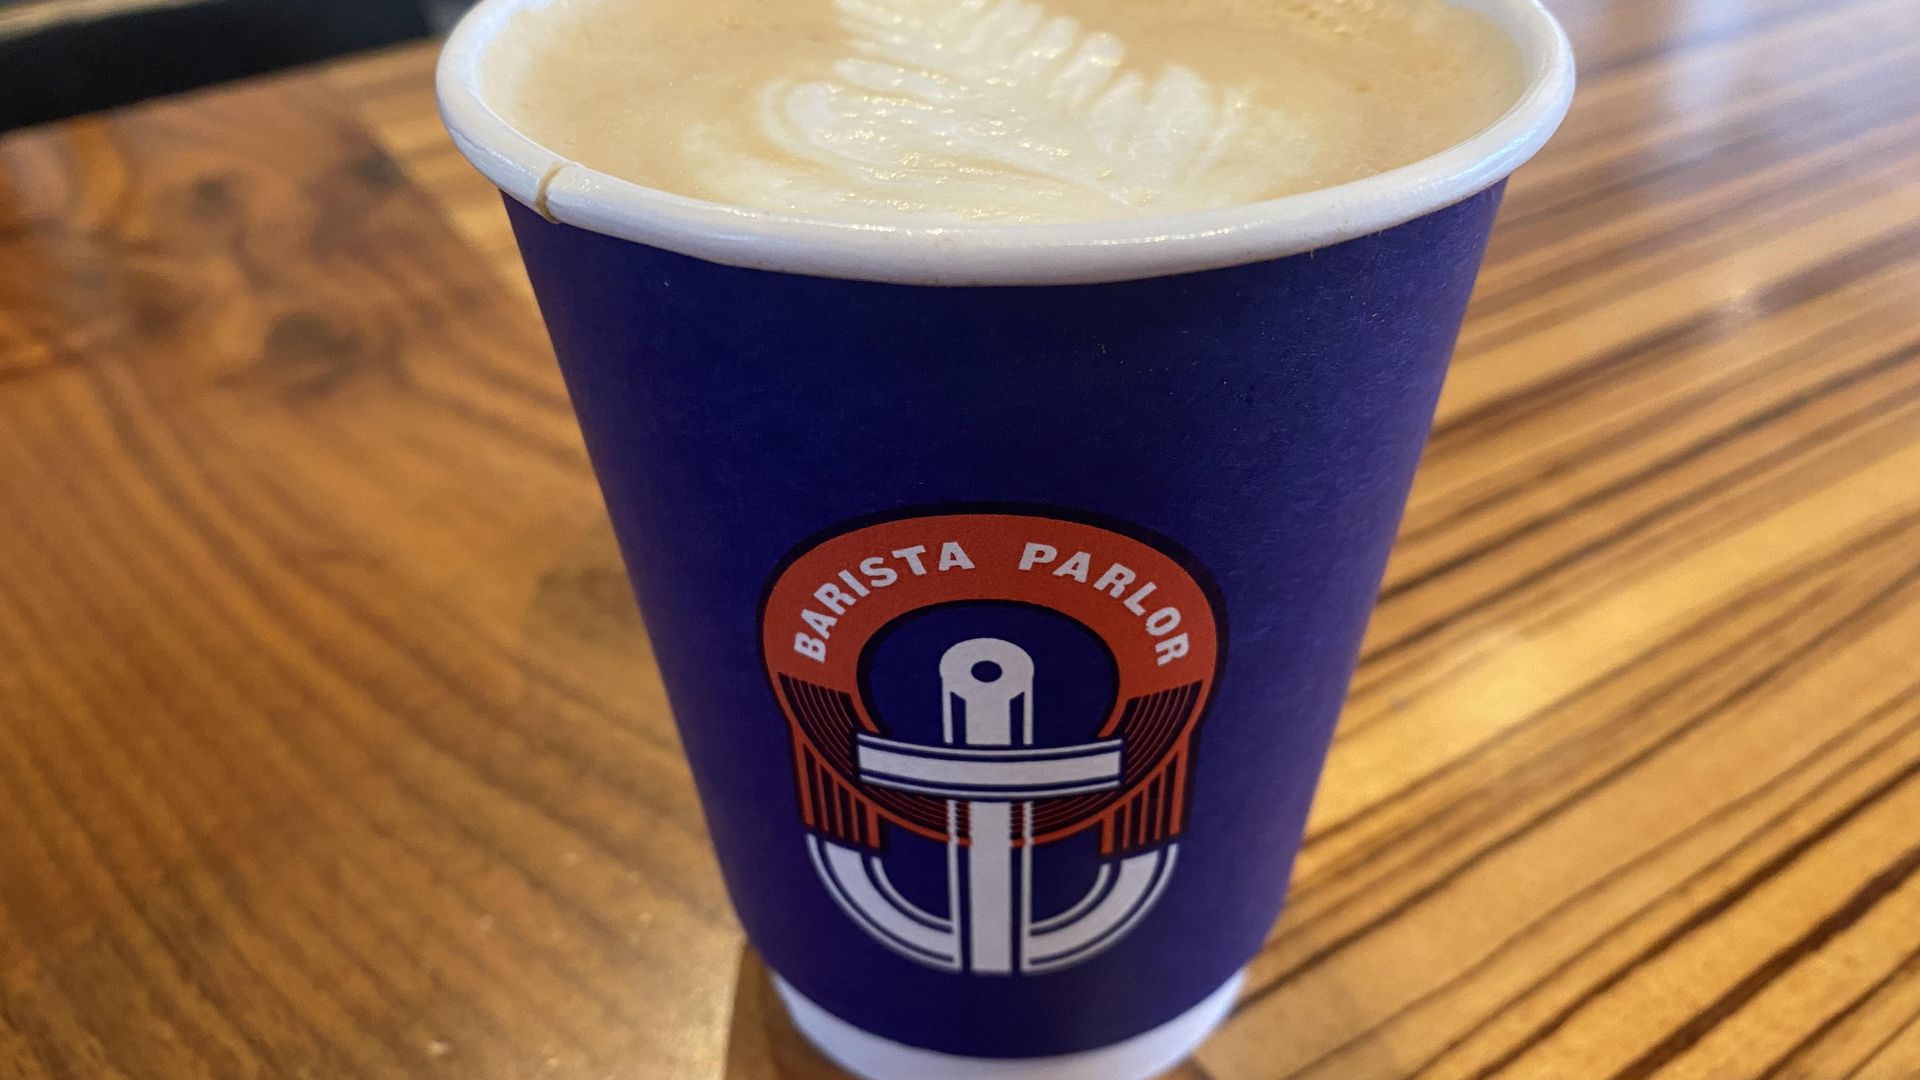 A latte from Barista Parlor